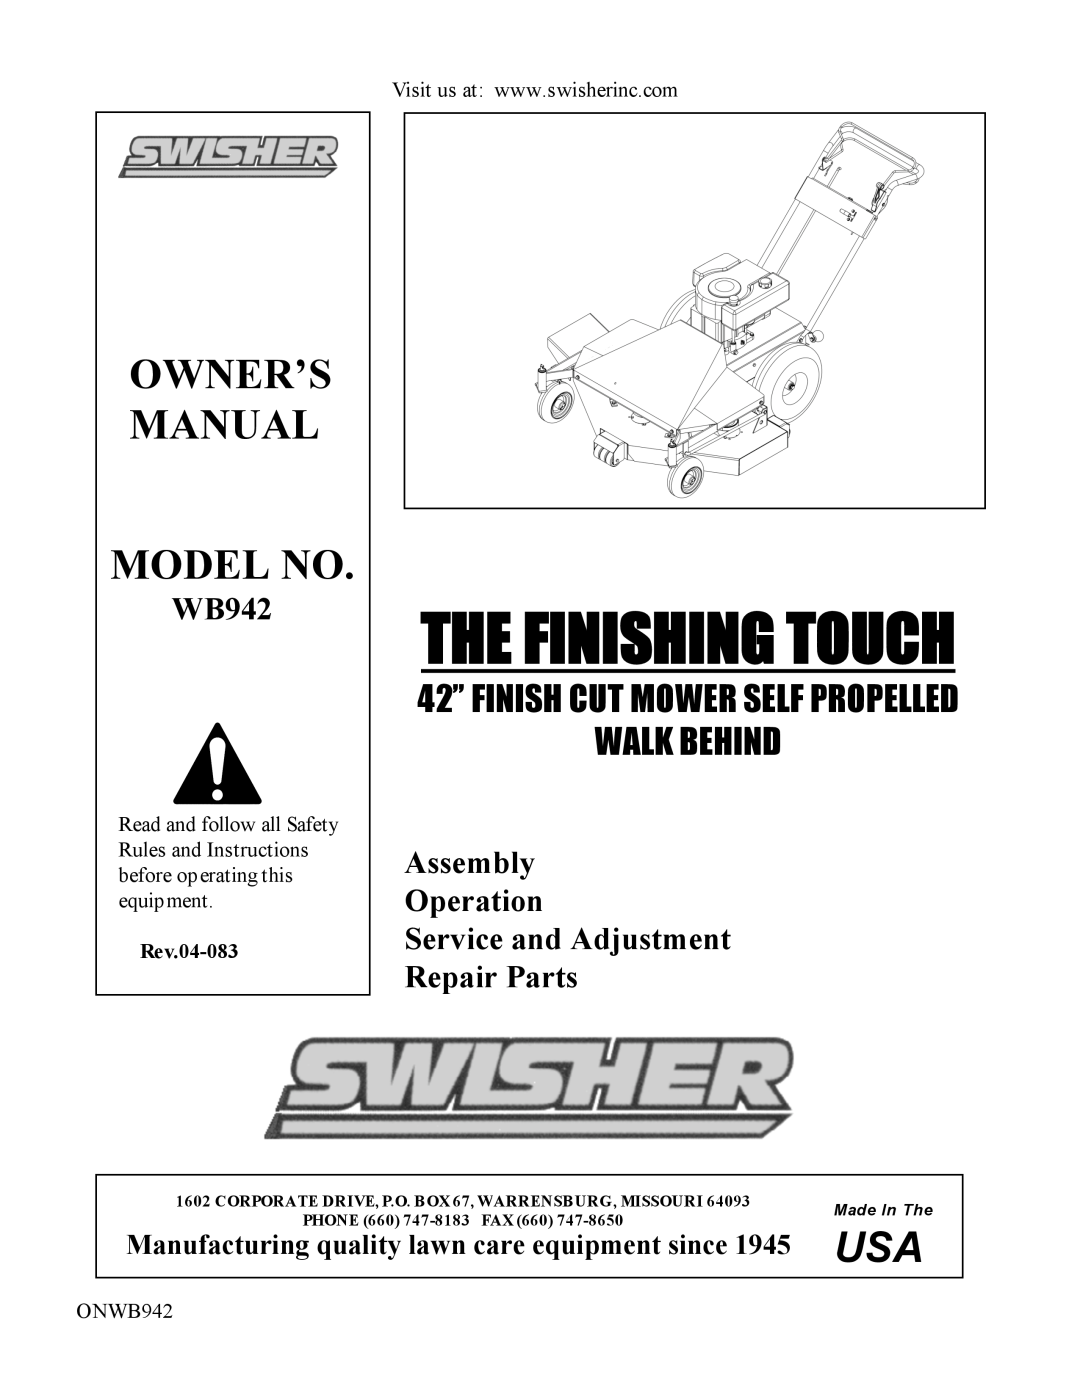 Swisher owner manual Assembly Operation Service and Adjustment, Repair Parts, Rev.04-083, ONWB942, The Finishing Touch 